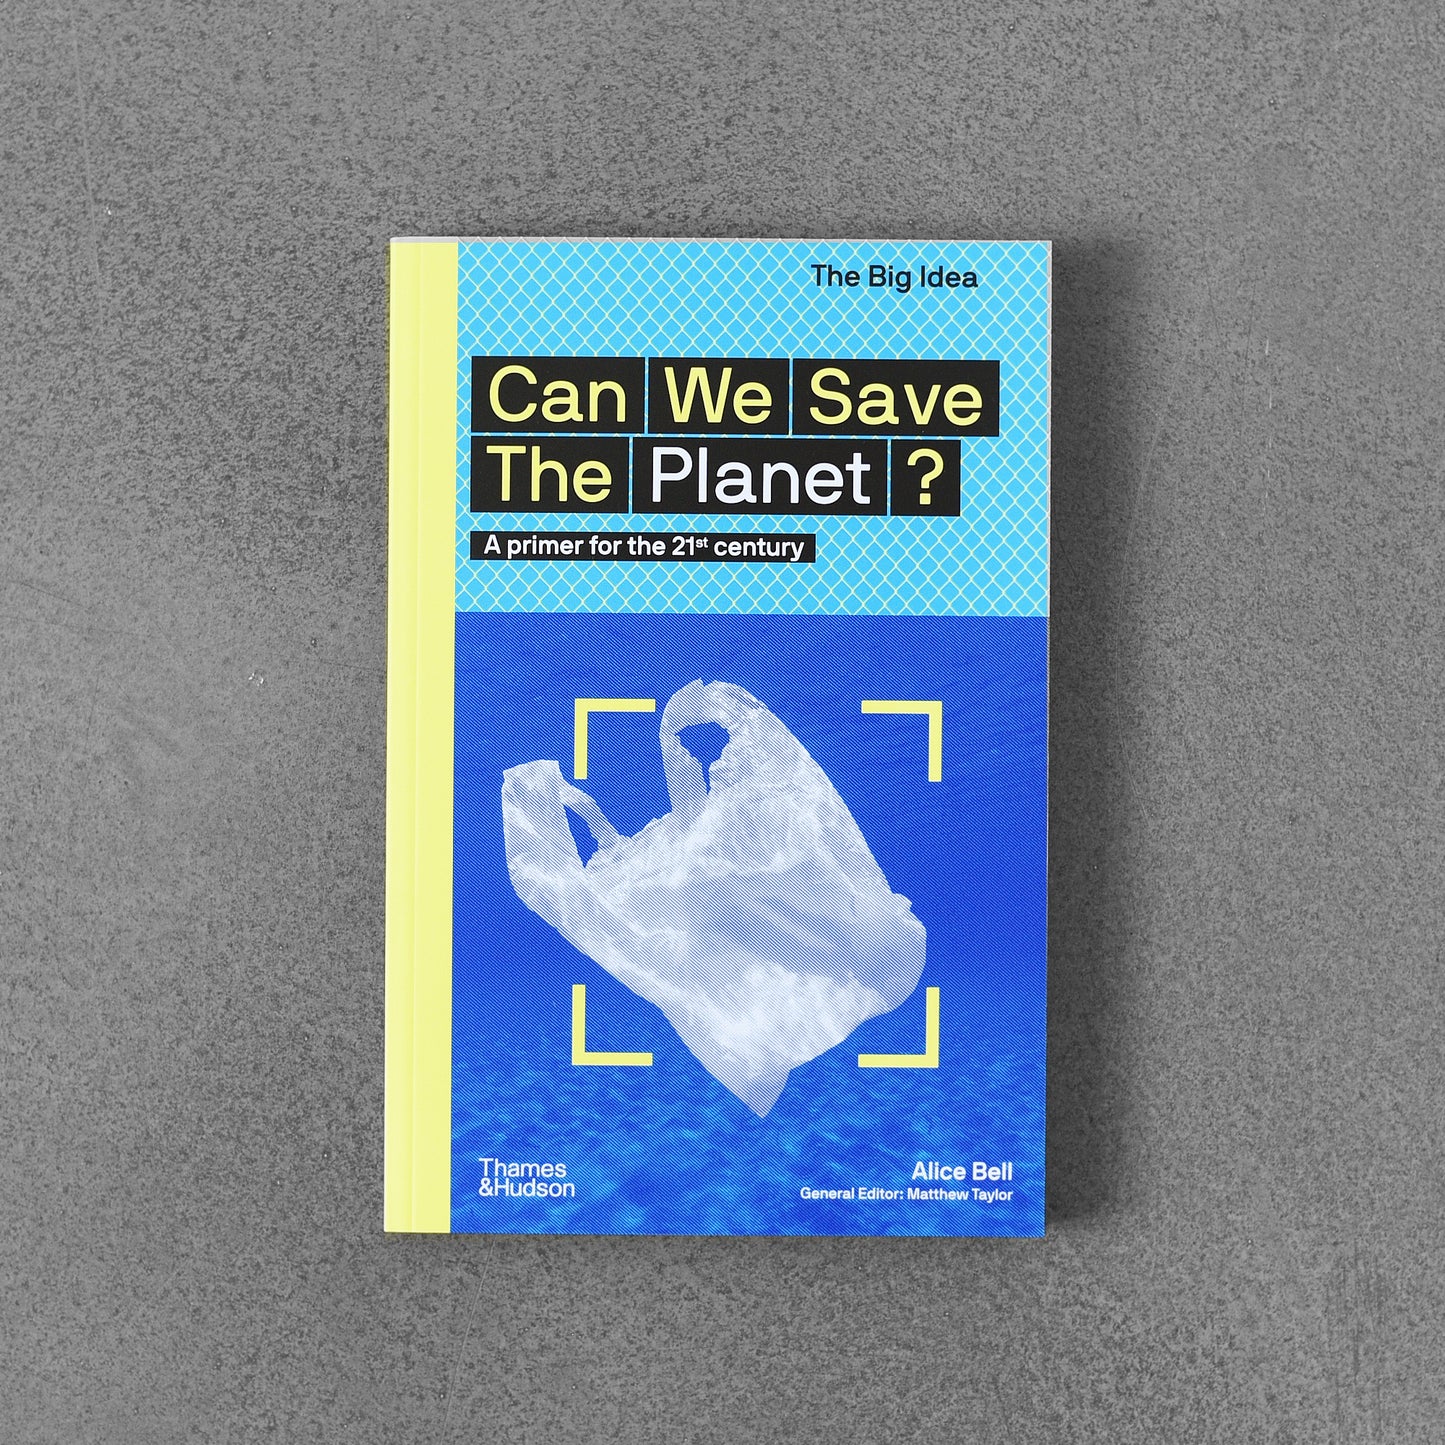 The Big Idea: Can We Save The Planet?